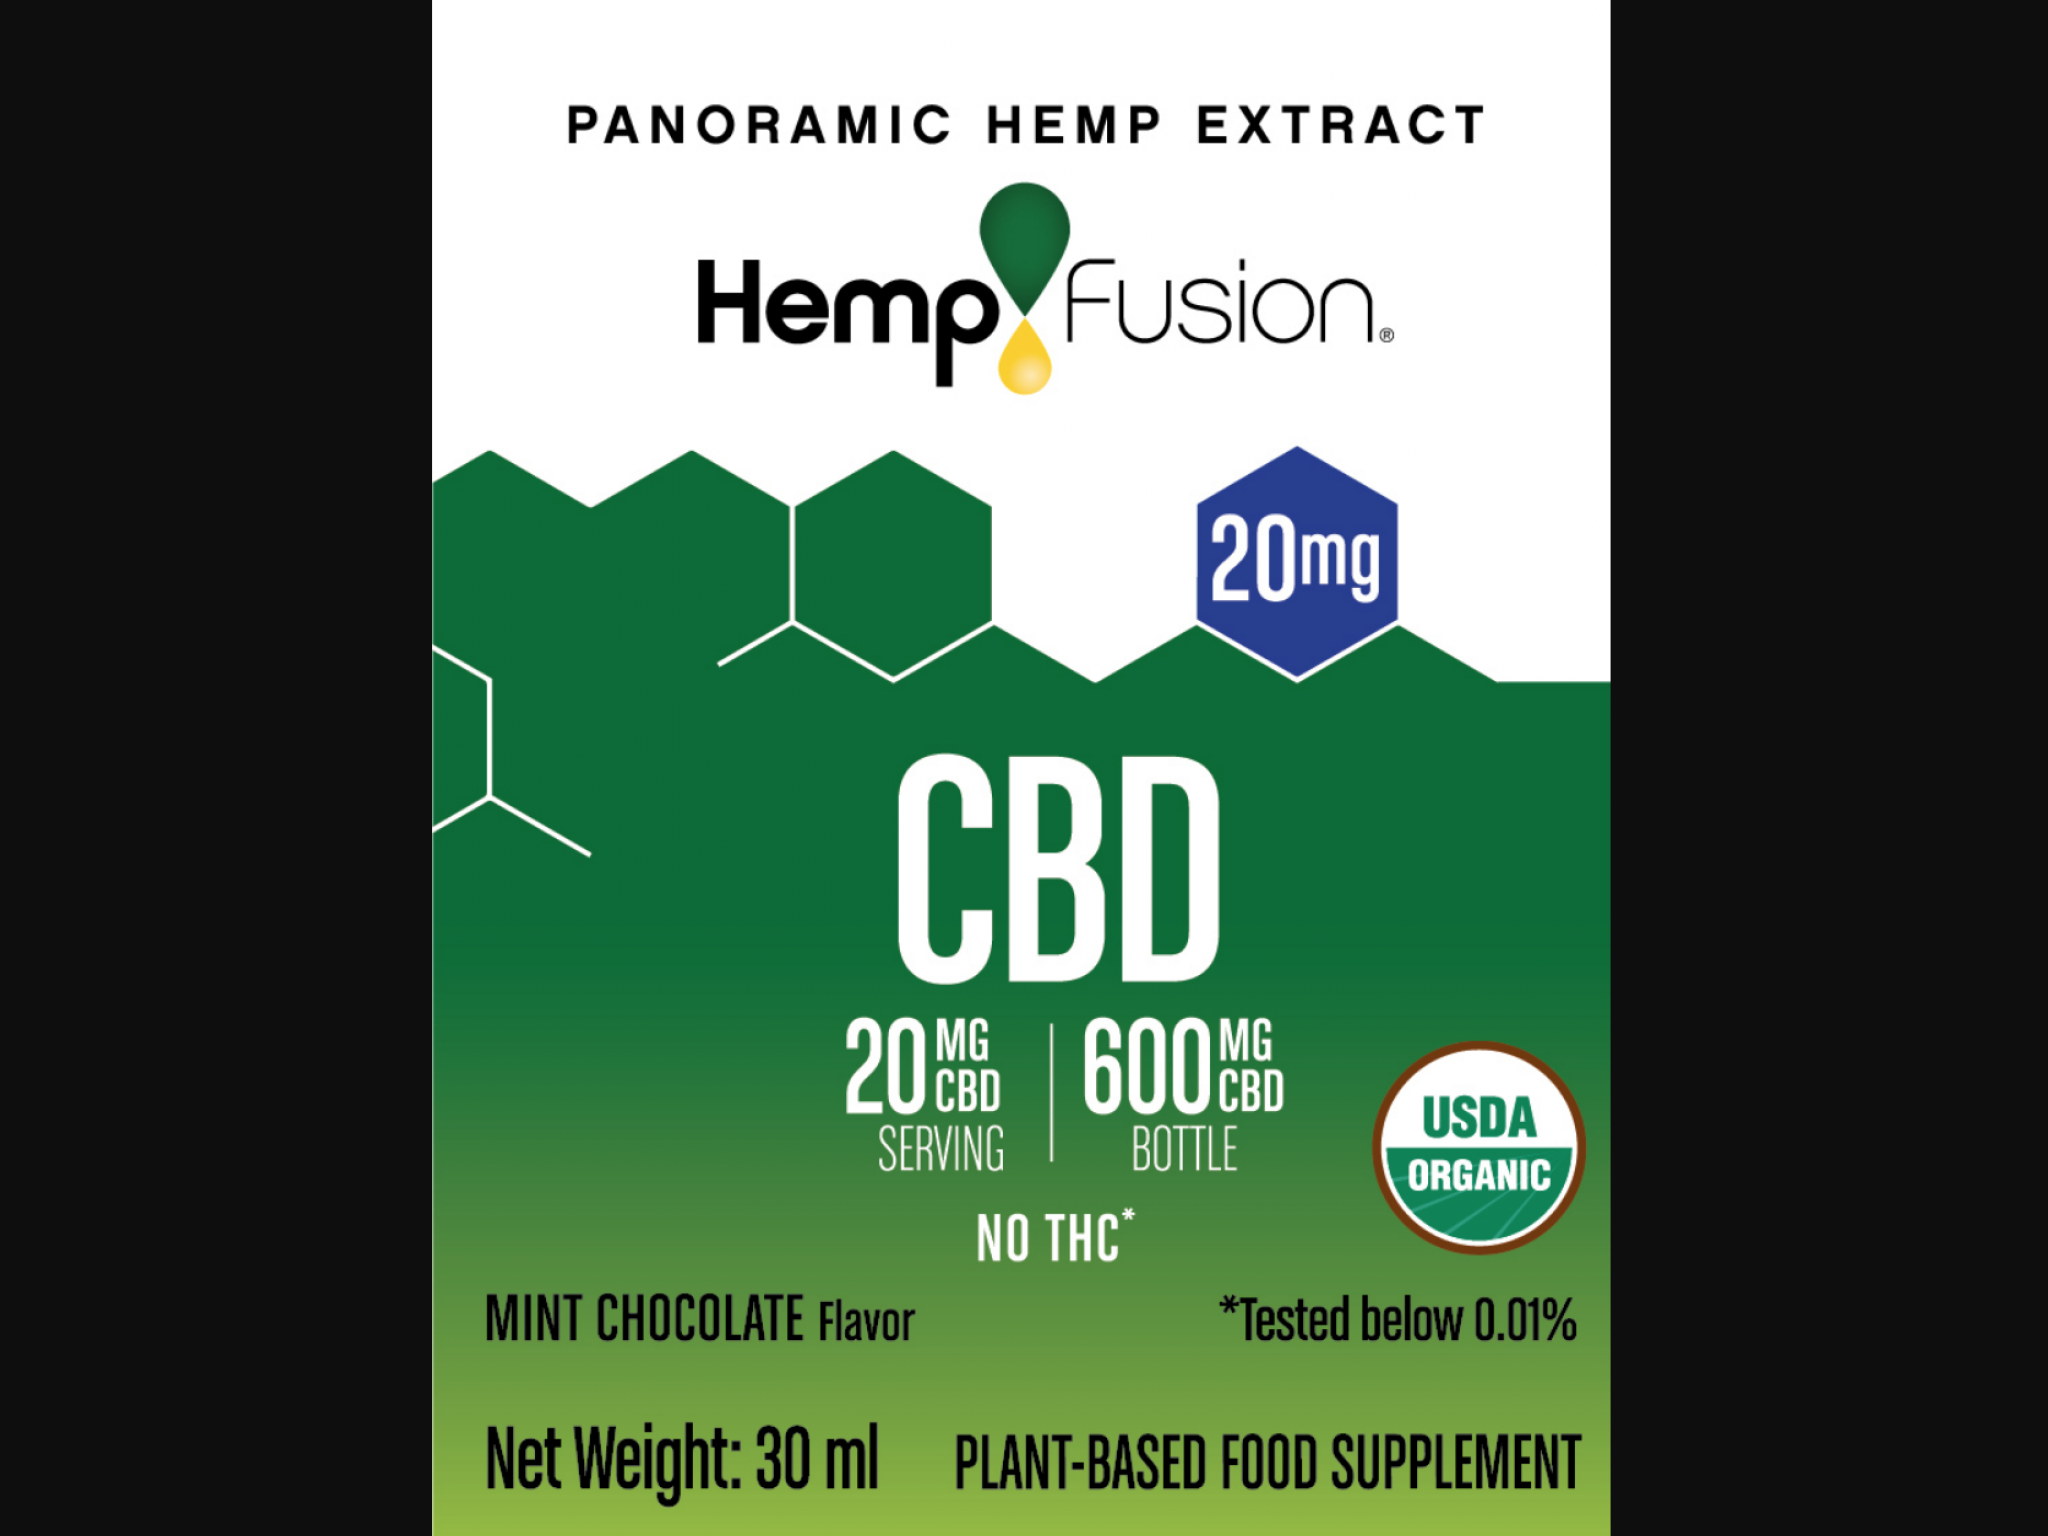  hempfusion-wellness-debuts-in-europe-via-deal-with-ireland-cpg-distributor 